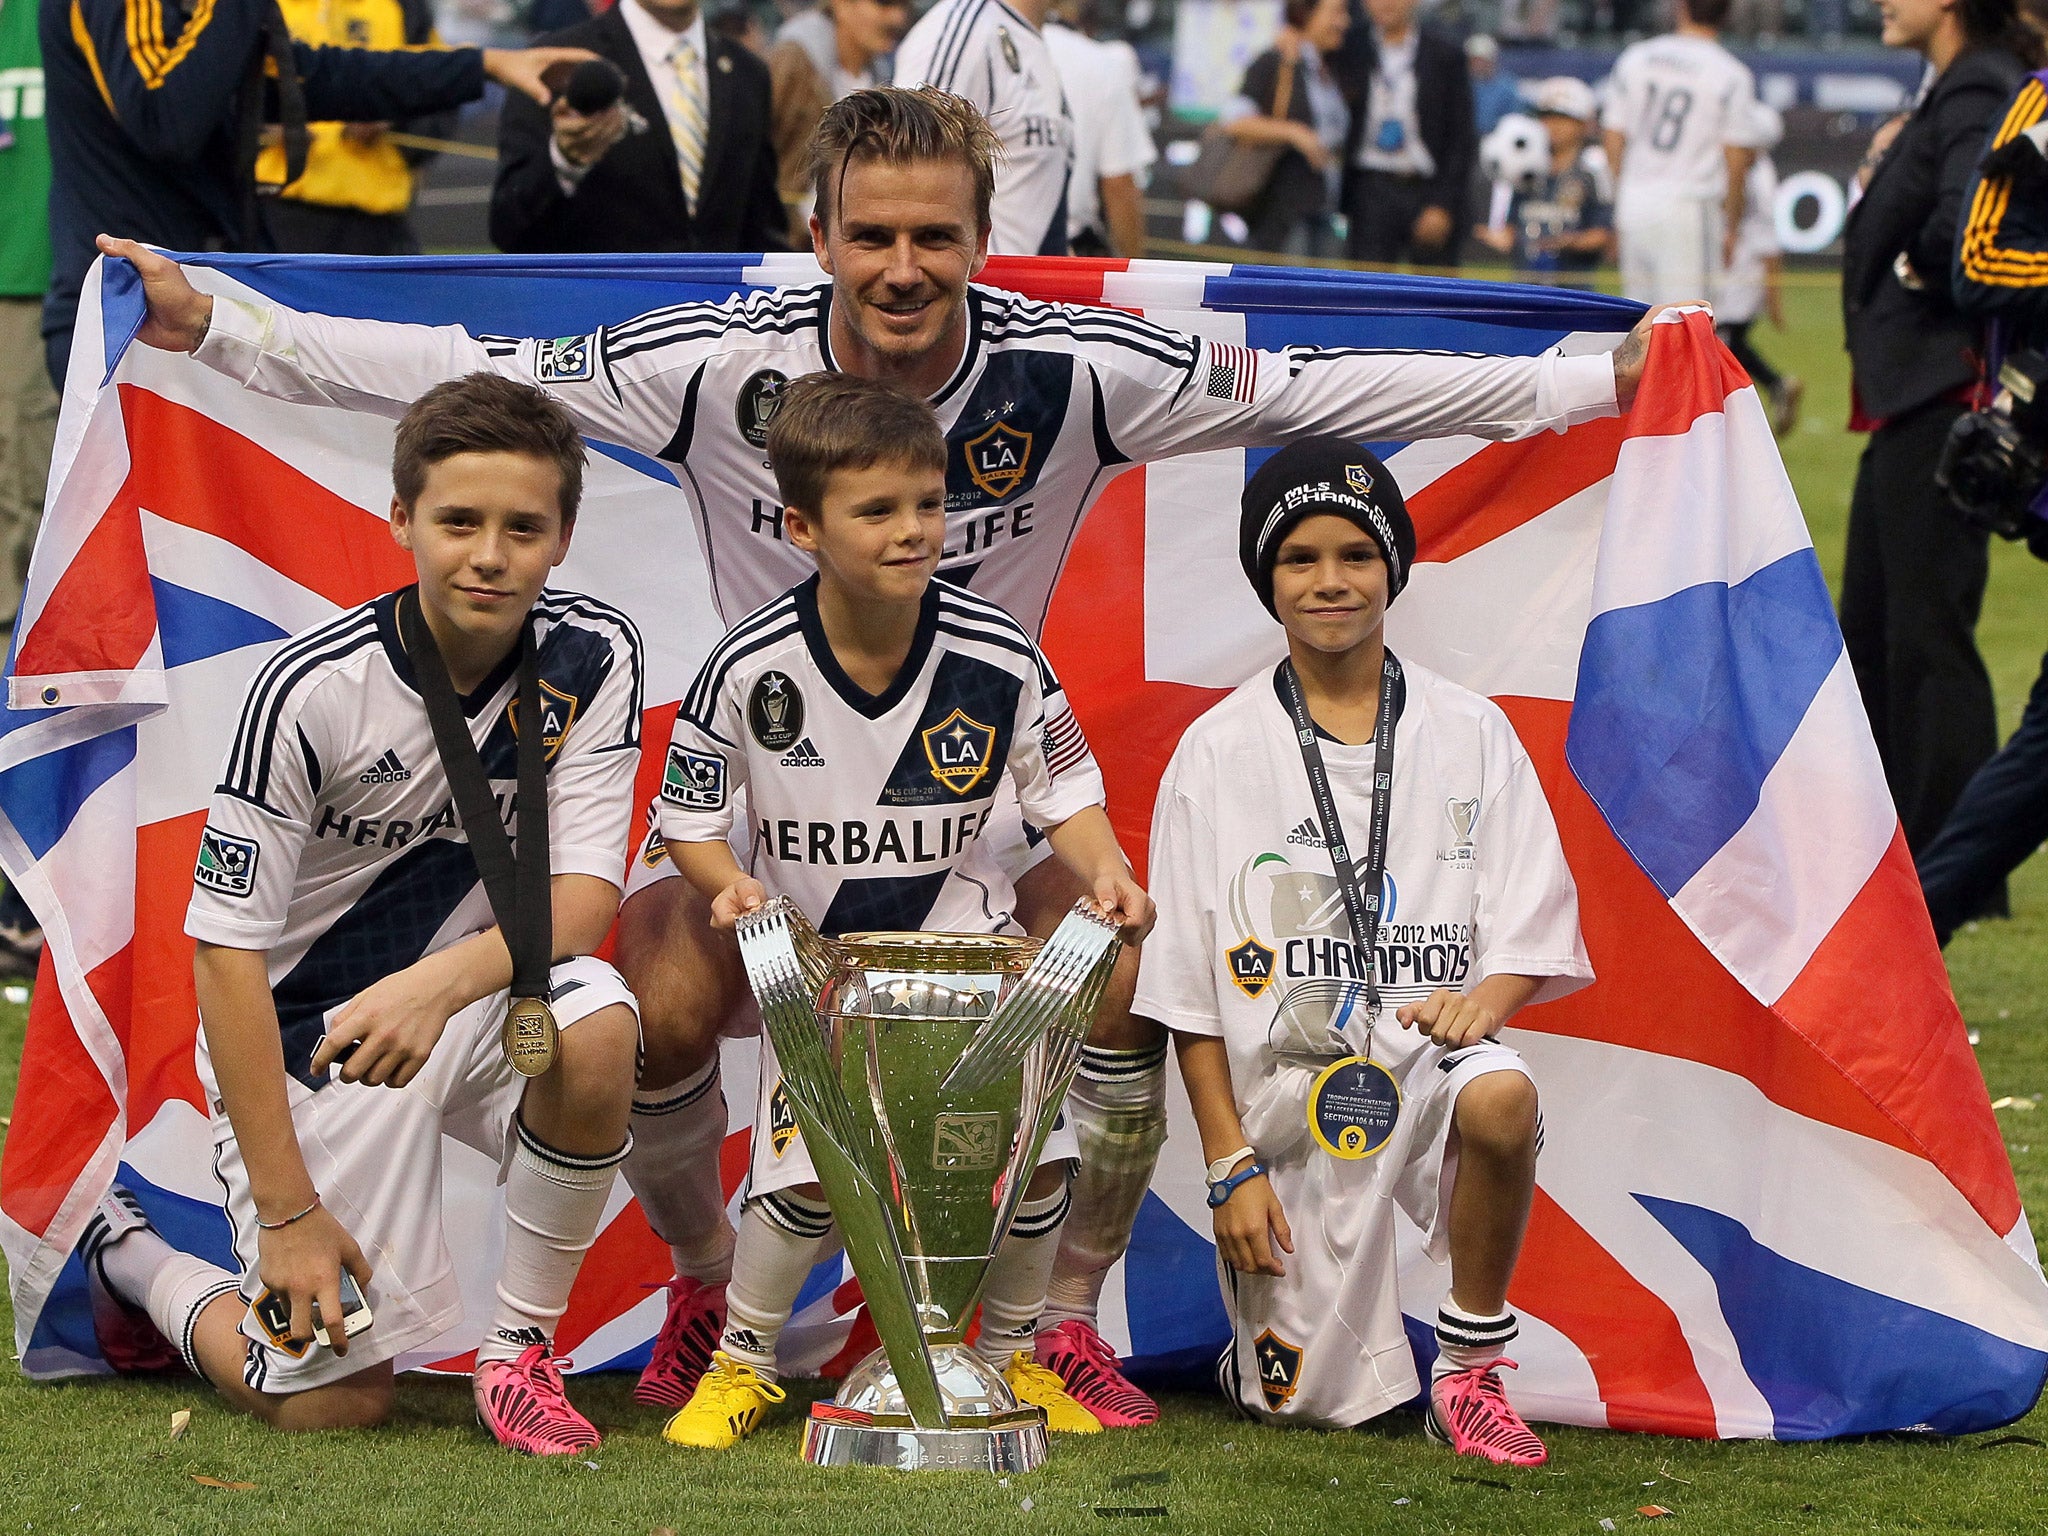 In December 2012 David Beckham helped to take LA Galaxy to victory in the Major League Soccer (MLS) Cup